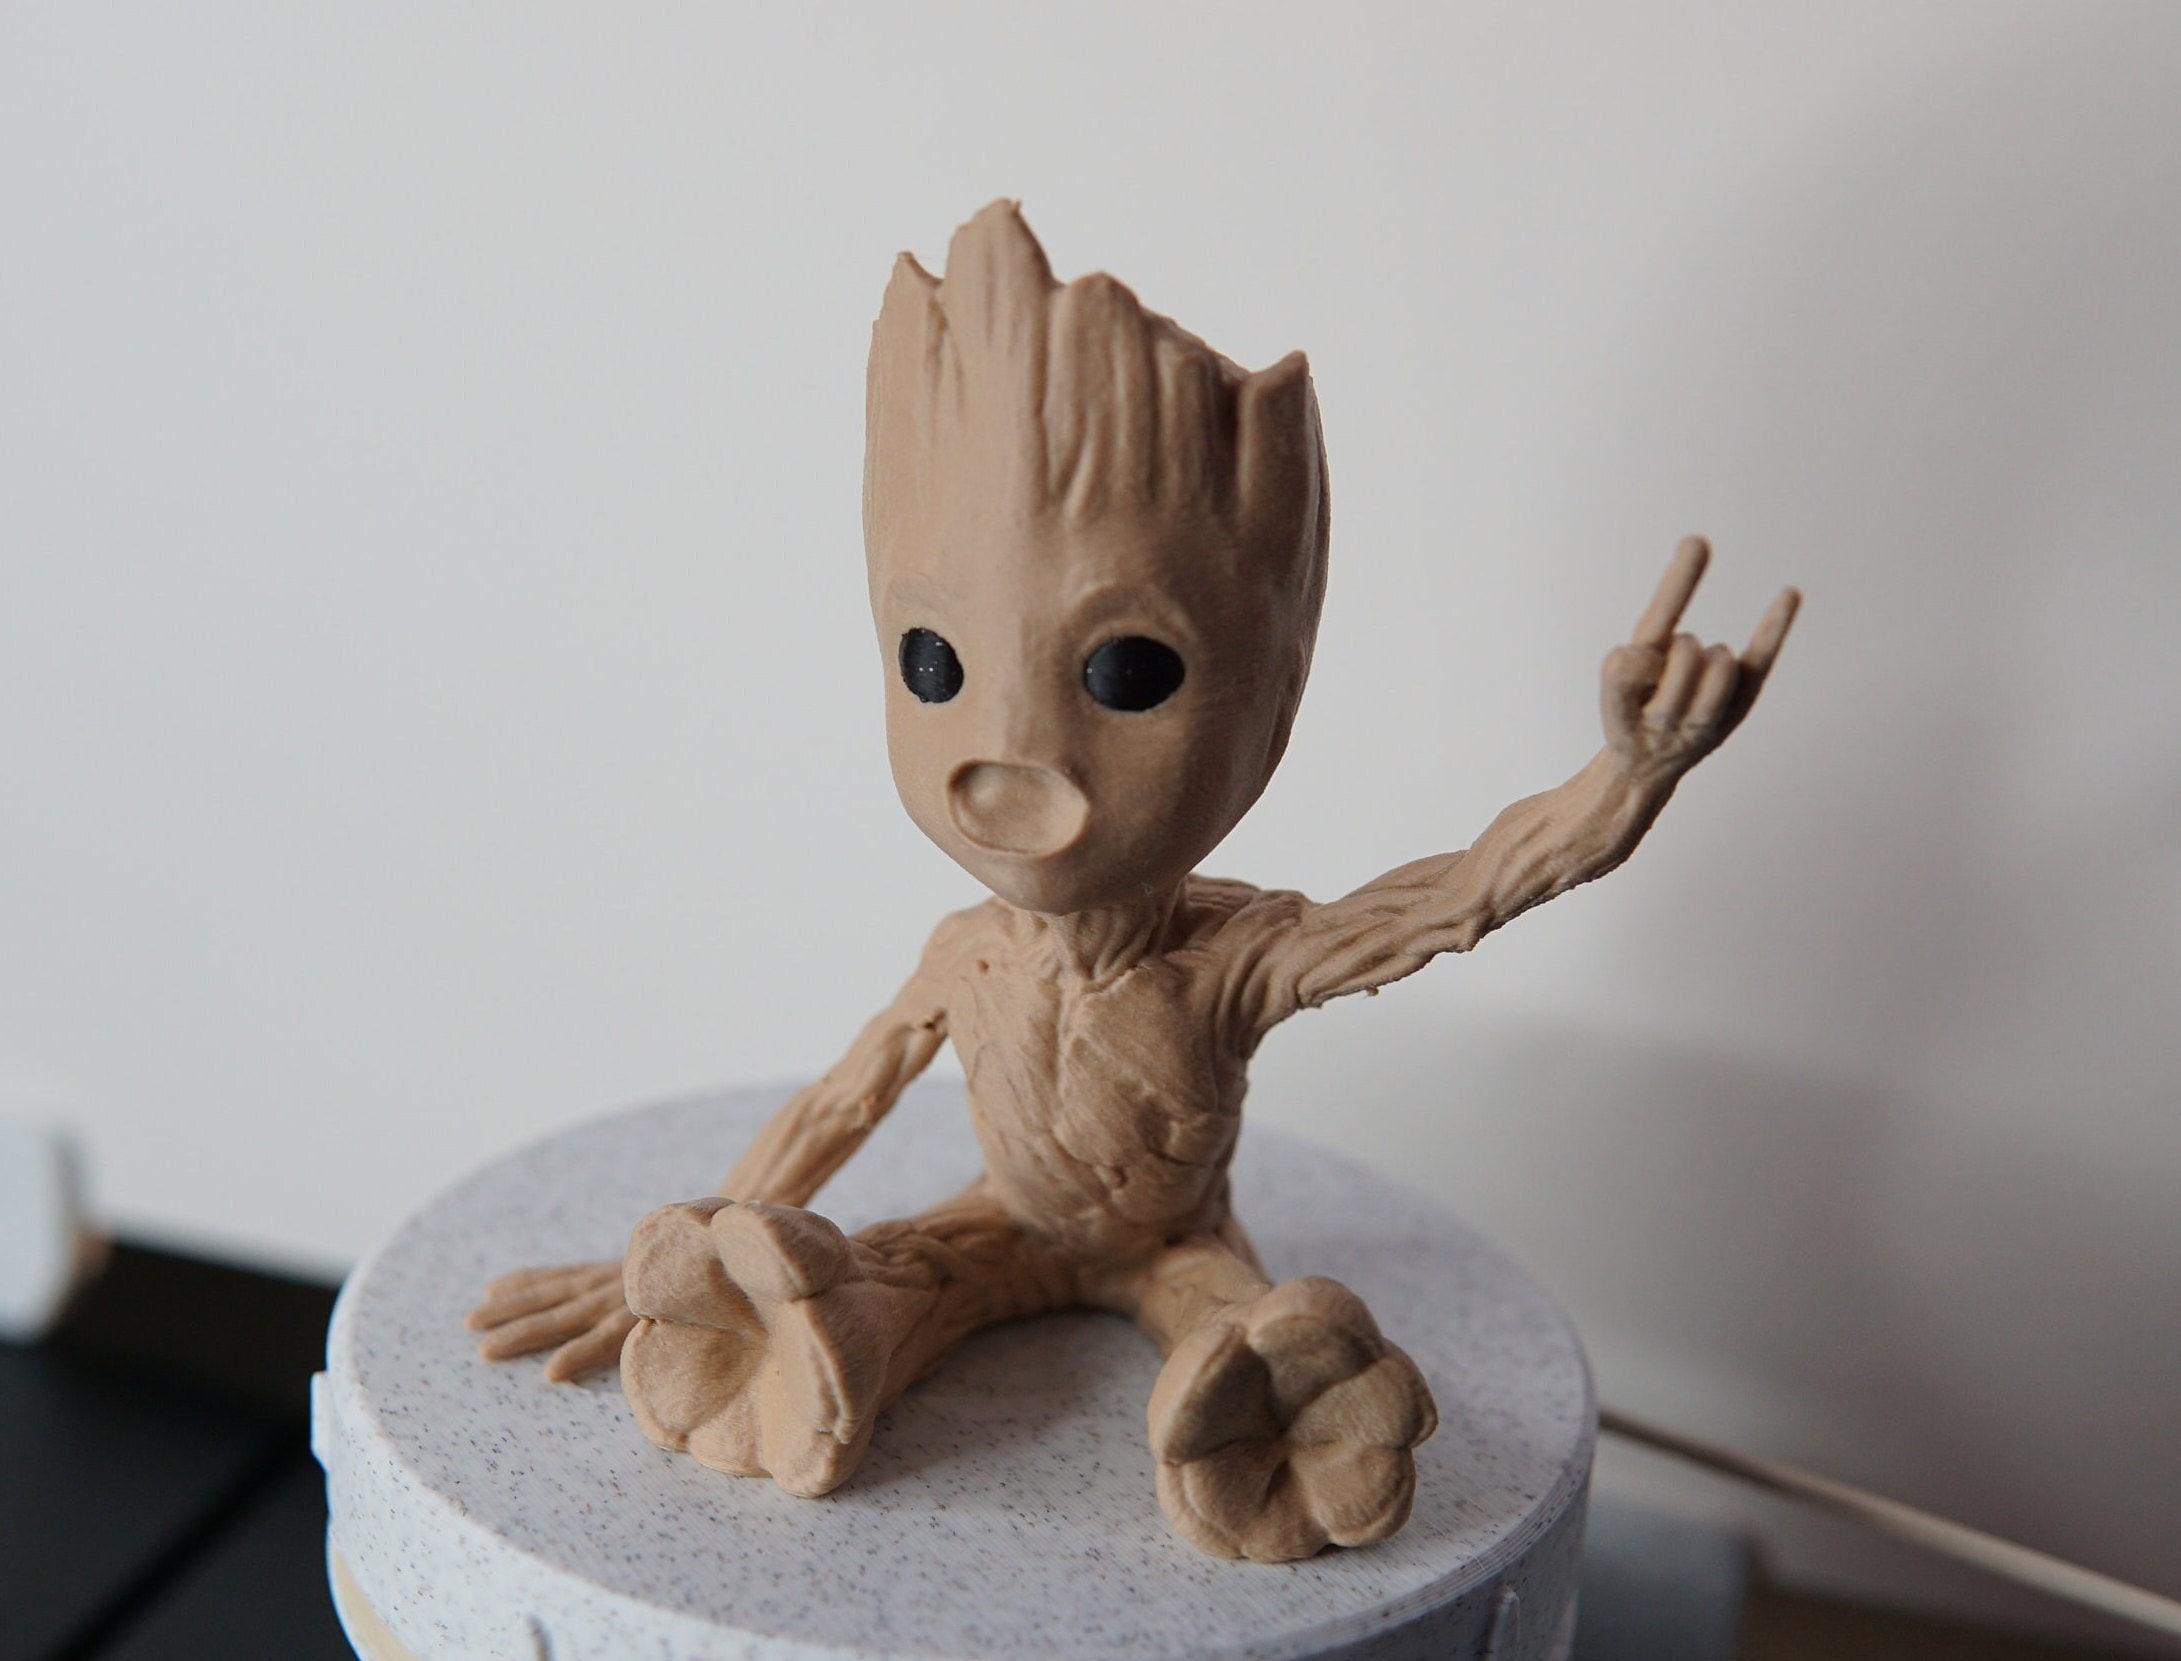 Figurine Groot - Support & Chargeur pour Manette et Smartphone- Cable Guys  - Label Emmaüs